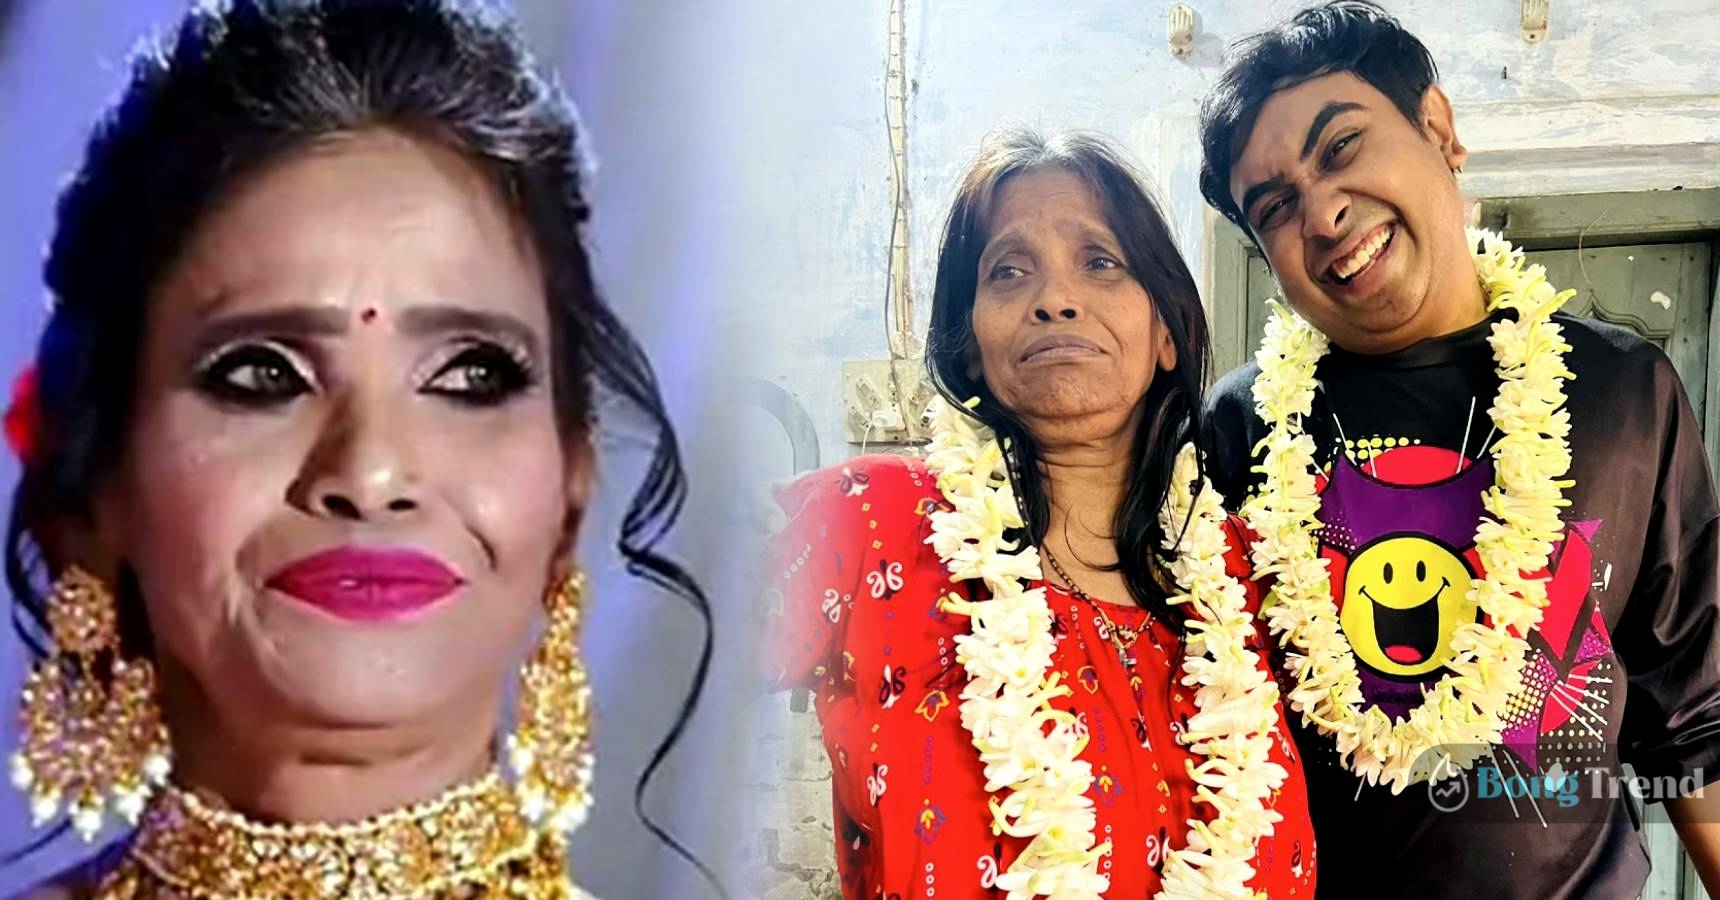 Sandy Saha posted marriage pictures with Ranu Mondal, see pics